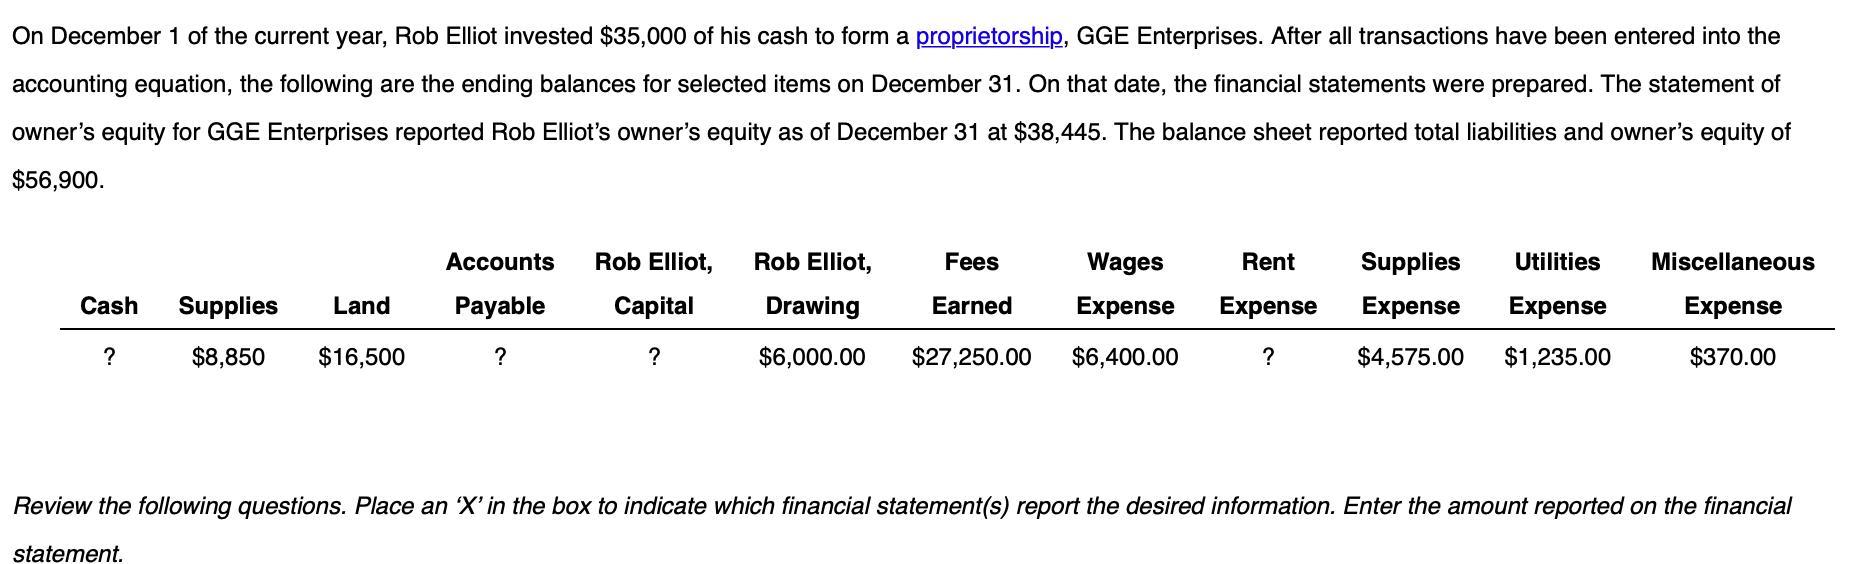 On December 1 of the current year, Rob Elliot invested $35,000 of his cash to form a proprietorship, GGE